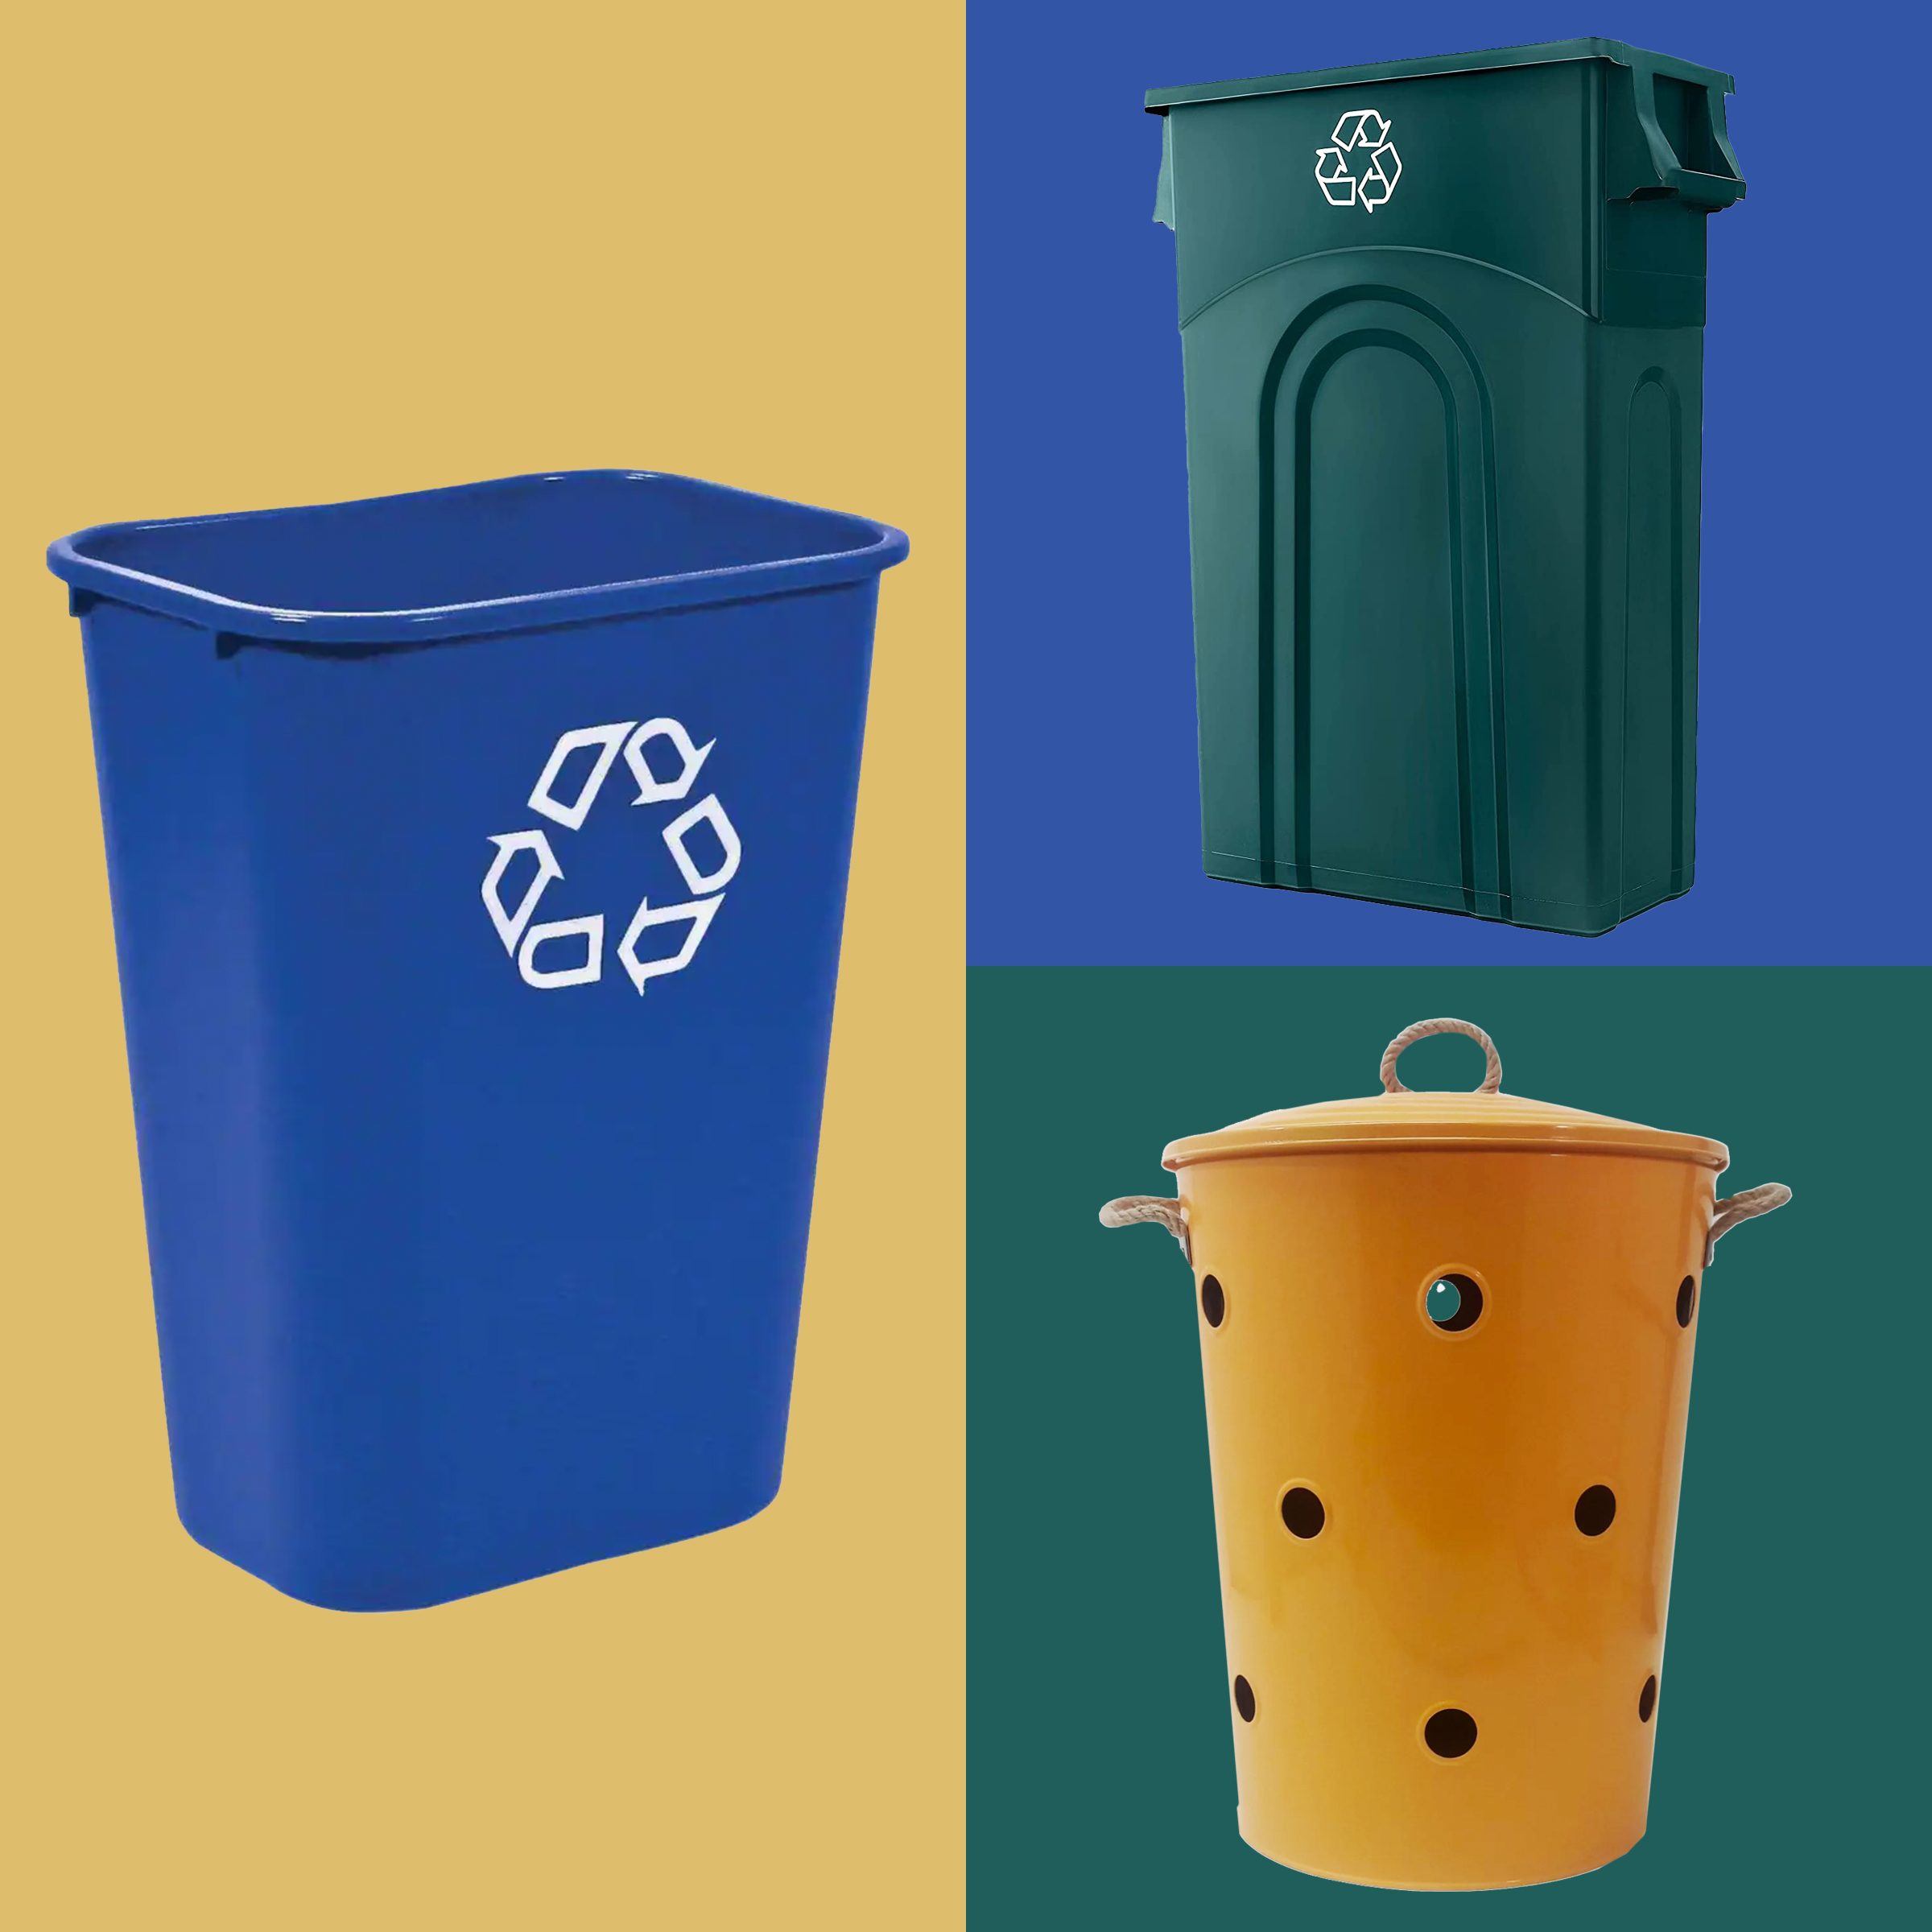 https://www.rd.com/wp-content/uploads/2022/07/recycling-bin-feature-collage.jpg